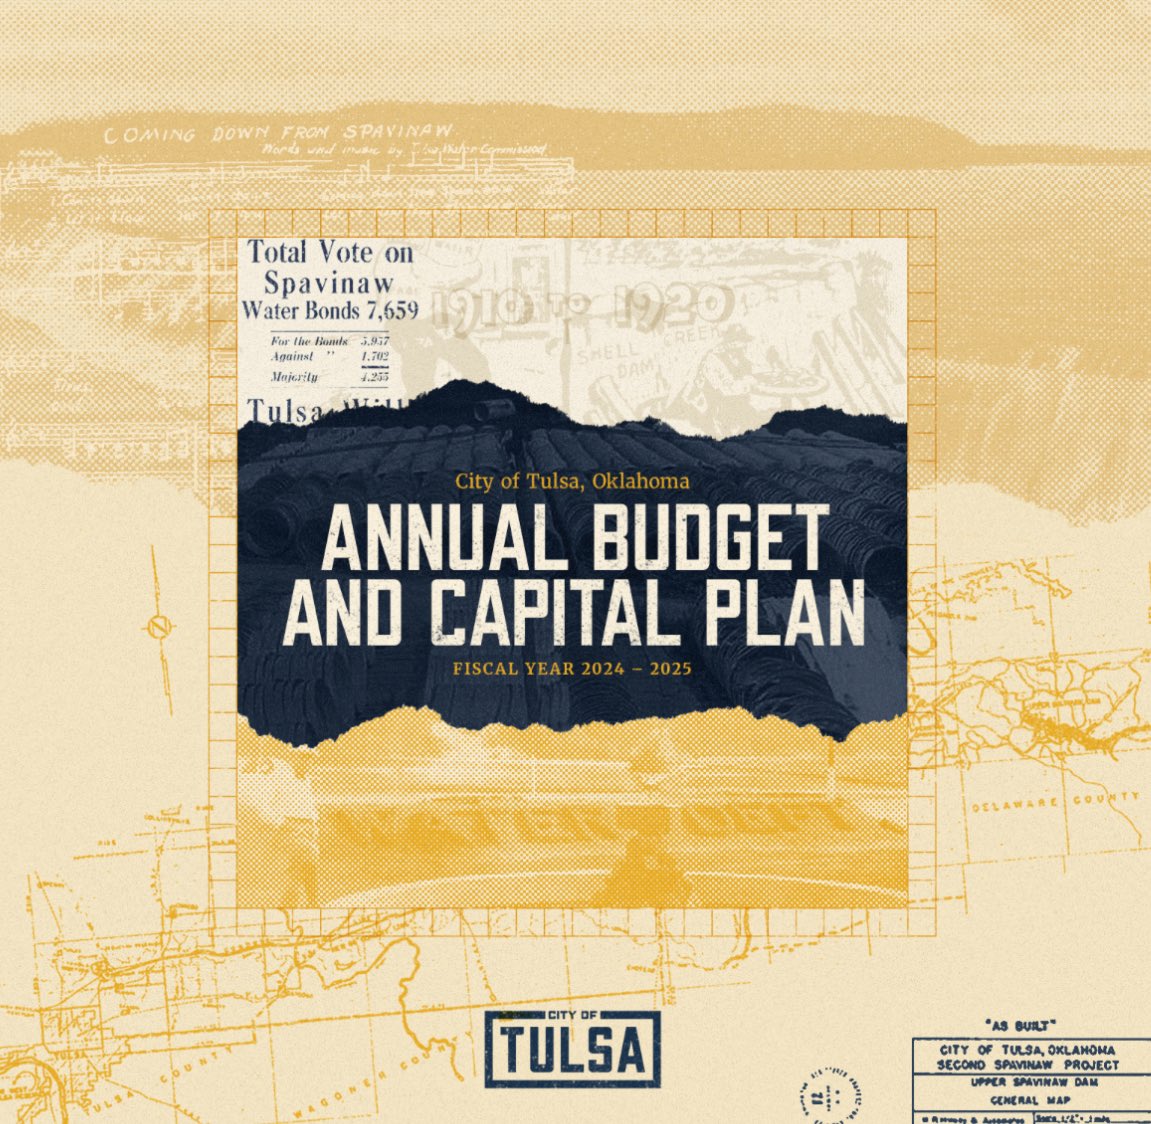 I presented my 8th and final proposed budget as mayor to the Tulsa City Council last night. For the first time, it exceeds $1 billion. This is not the result of a tax increase, but instead reflects Tulsa’s economic growth. This budget is balanced, and it proposes to fund: *Two…